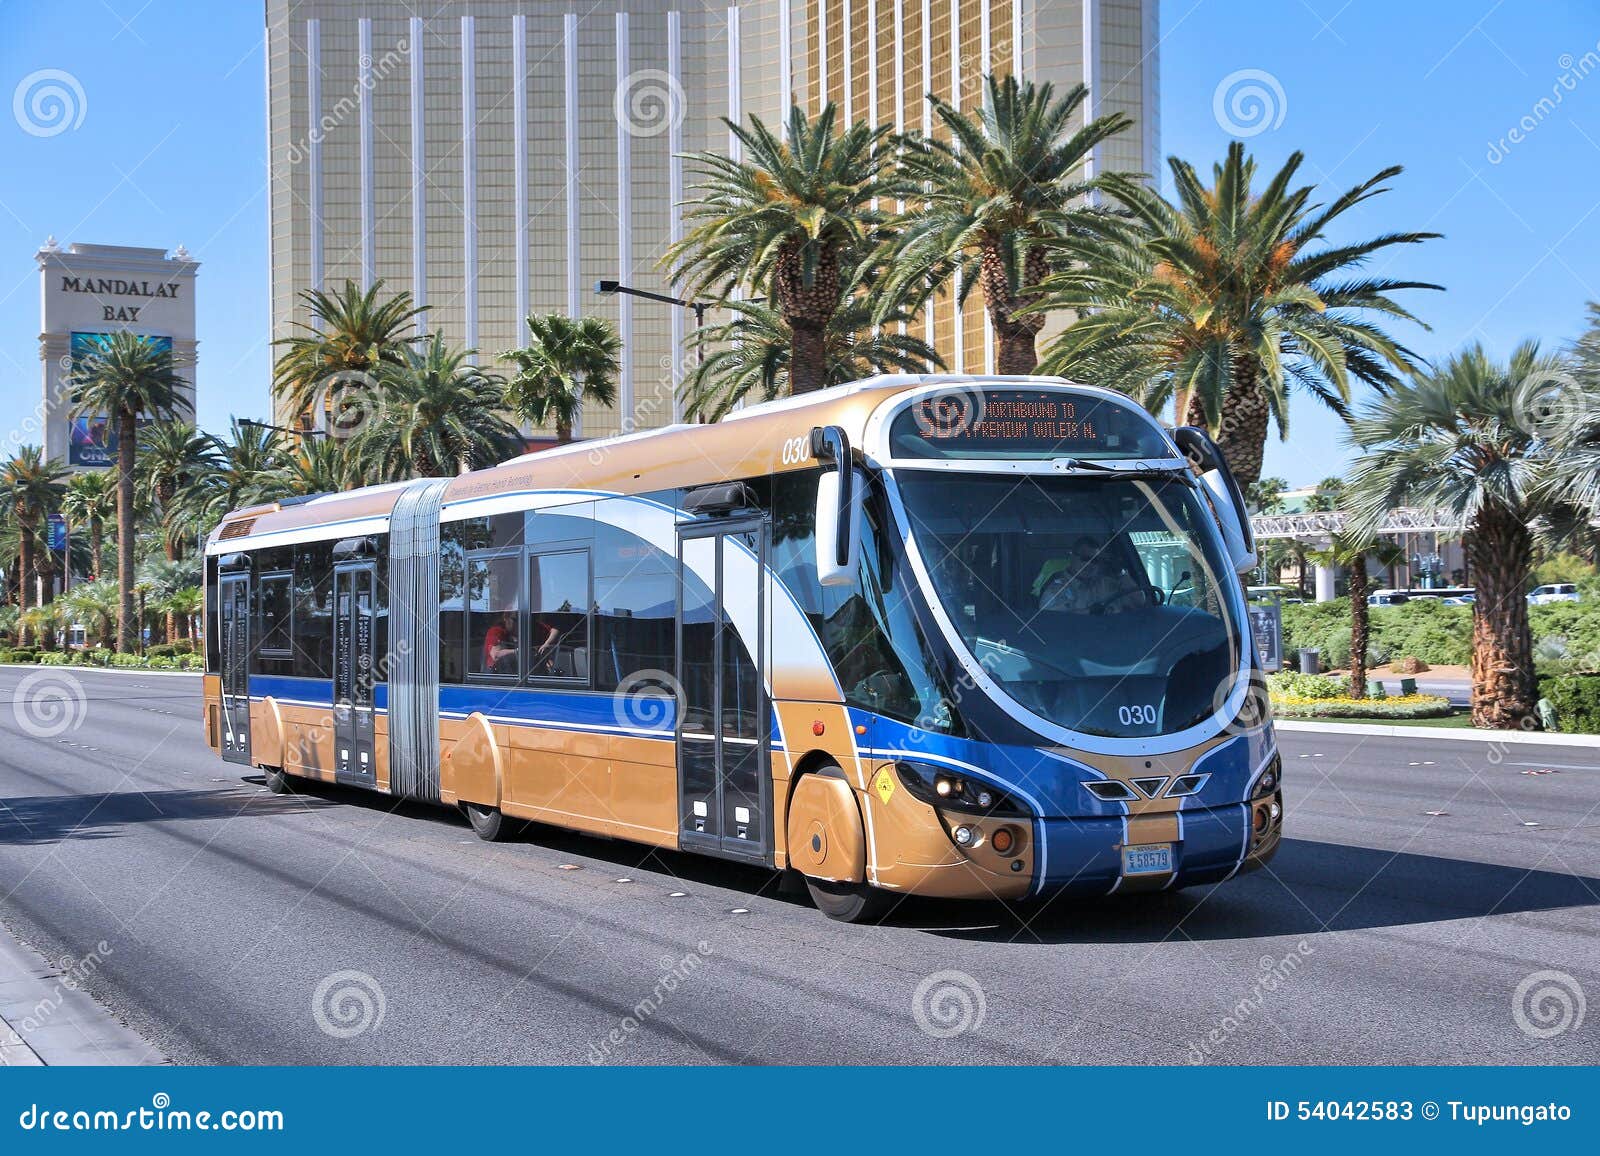 las-vegas-city-bus-usa-april-people-ride-sdx-sdx-operated-wright-streetcar-articulated-hybrid-manufactured-54042583.jpg